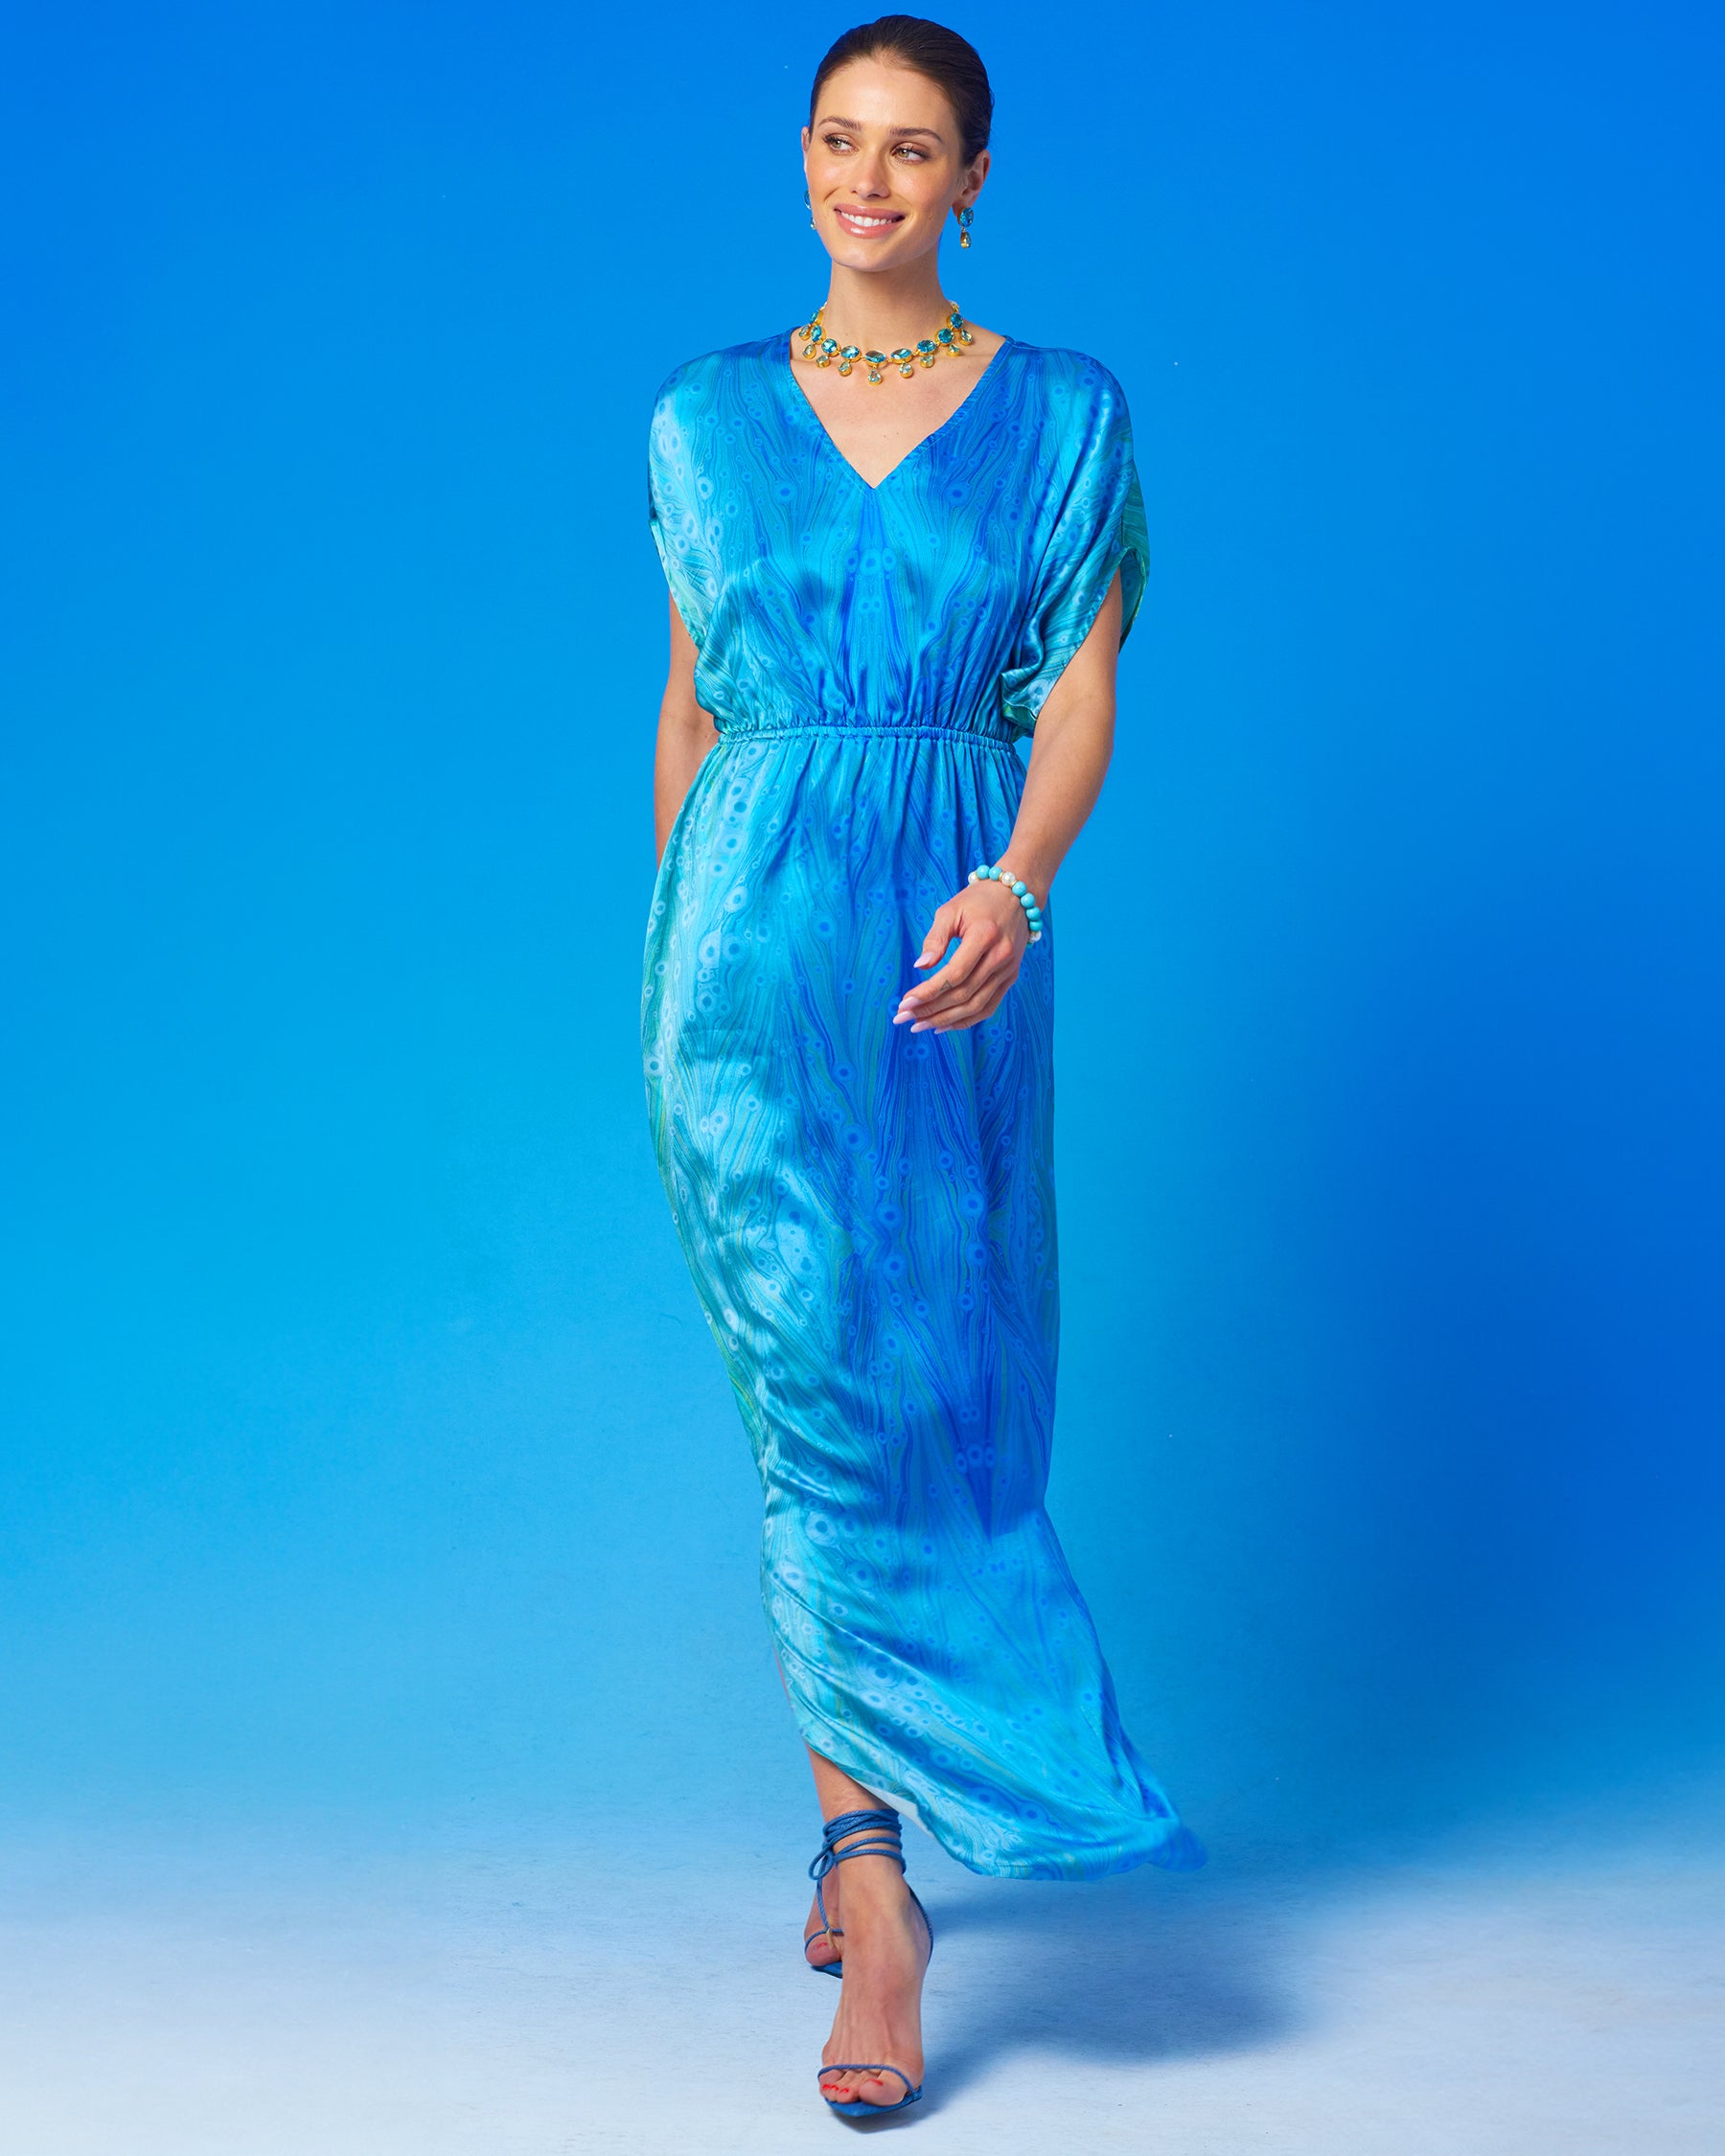 Calliope Long Silk Dress in Sea Nymph Blues front view walking